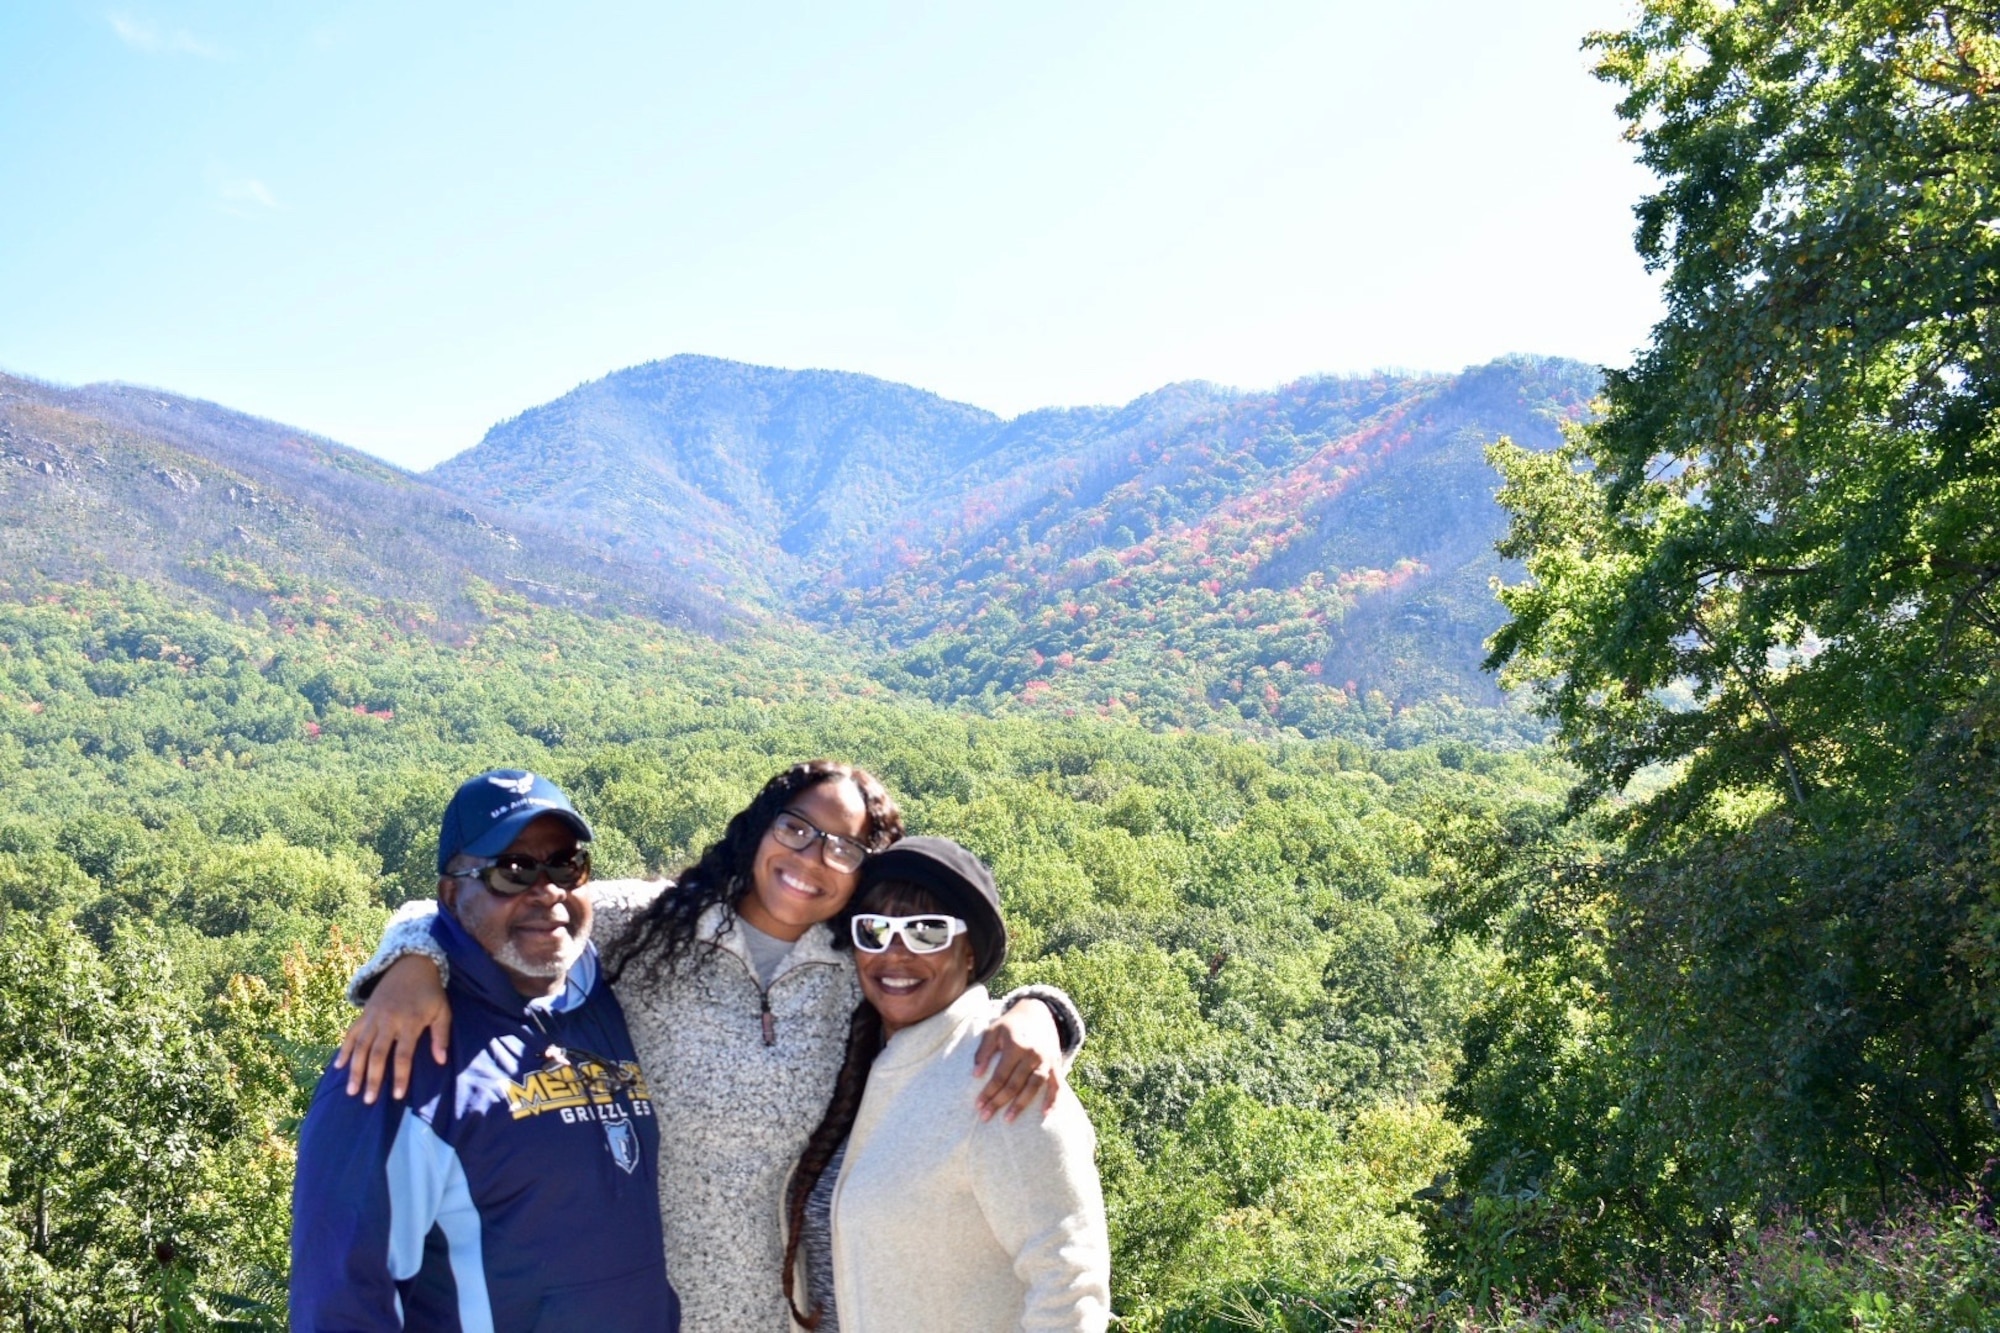 Senior Airman Jade Cairns (center), 60th Diagnostics and Therapeutics Squadron medical laboratory technician, poses for a photo with her grandparents at the Great Smoky Mountains National Park, Tennessee, 2018. After dropping out of college in 2013, Cairns moved in with her grandparents in 2014 which eventually led her to joining the Air Force in 2016. (courtesy photo)